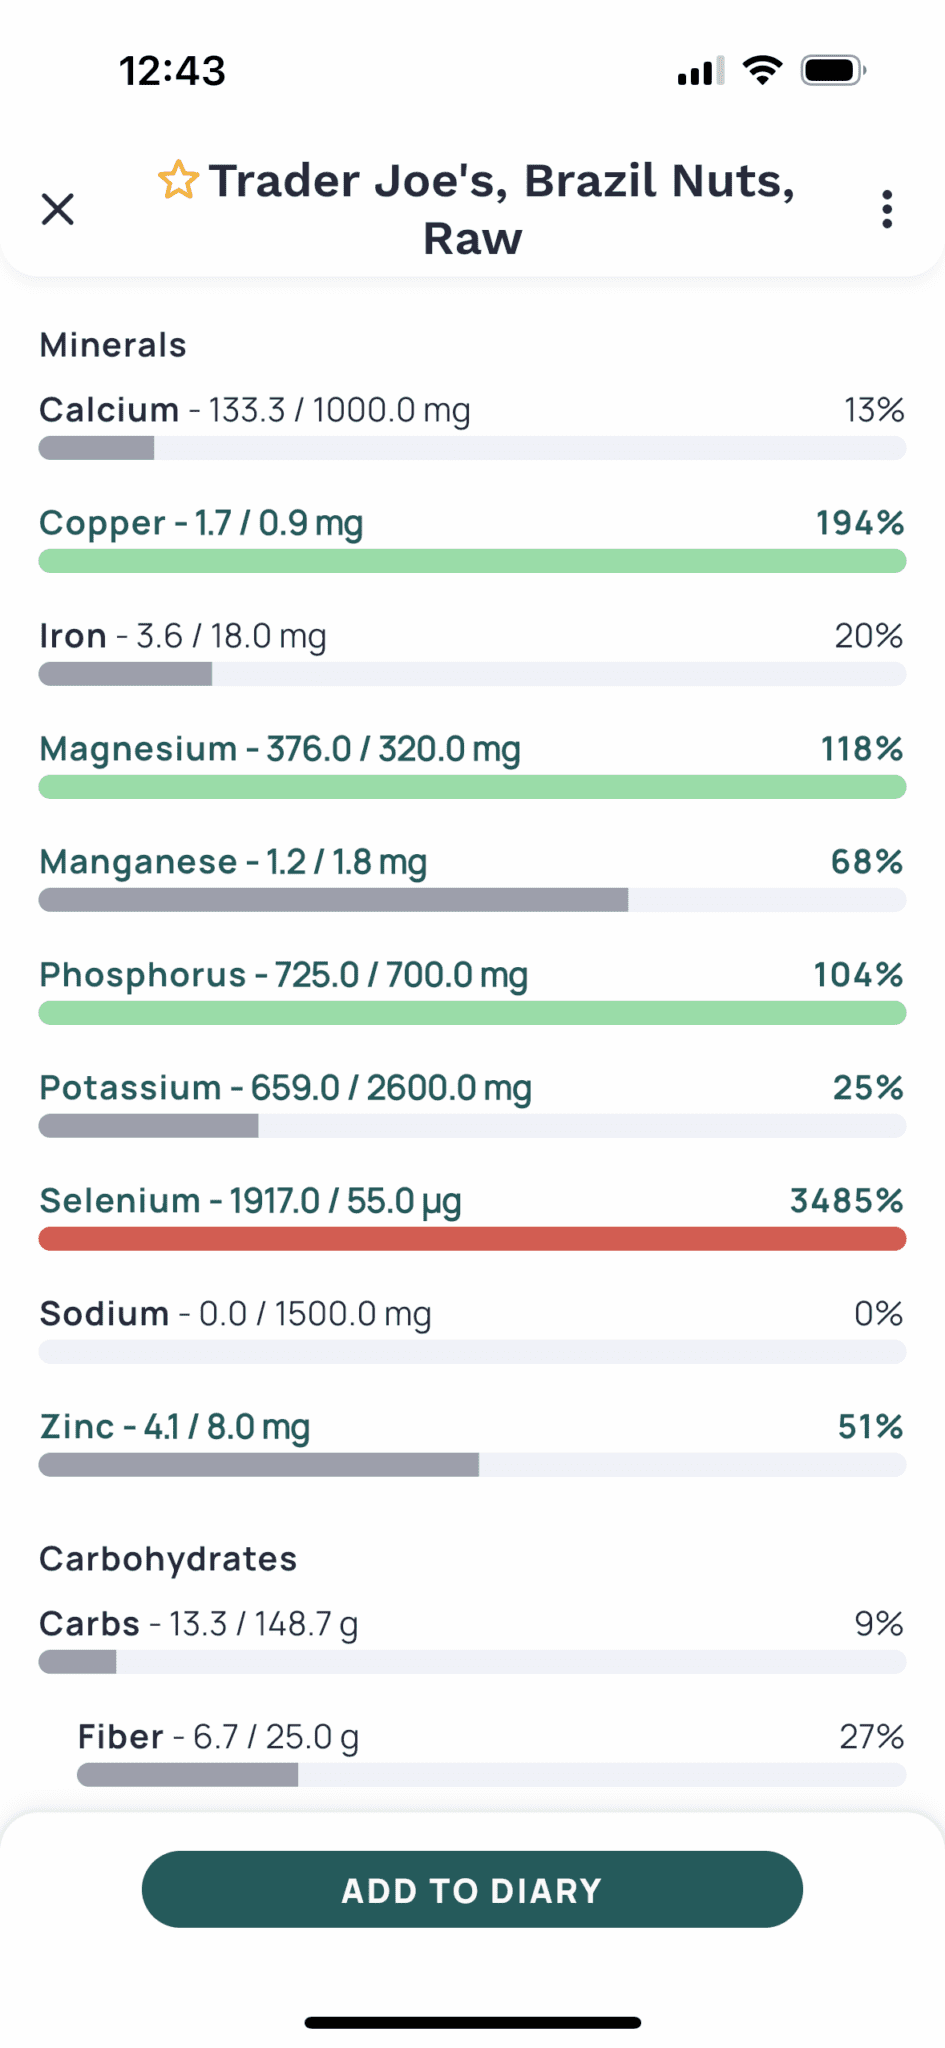 Added nutrients are highlighted in green.